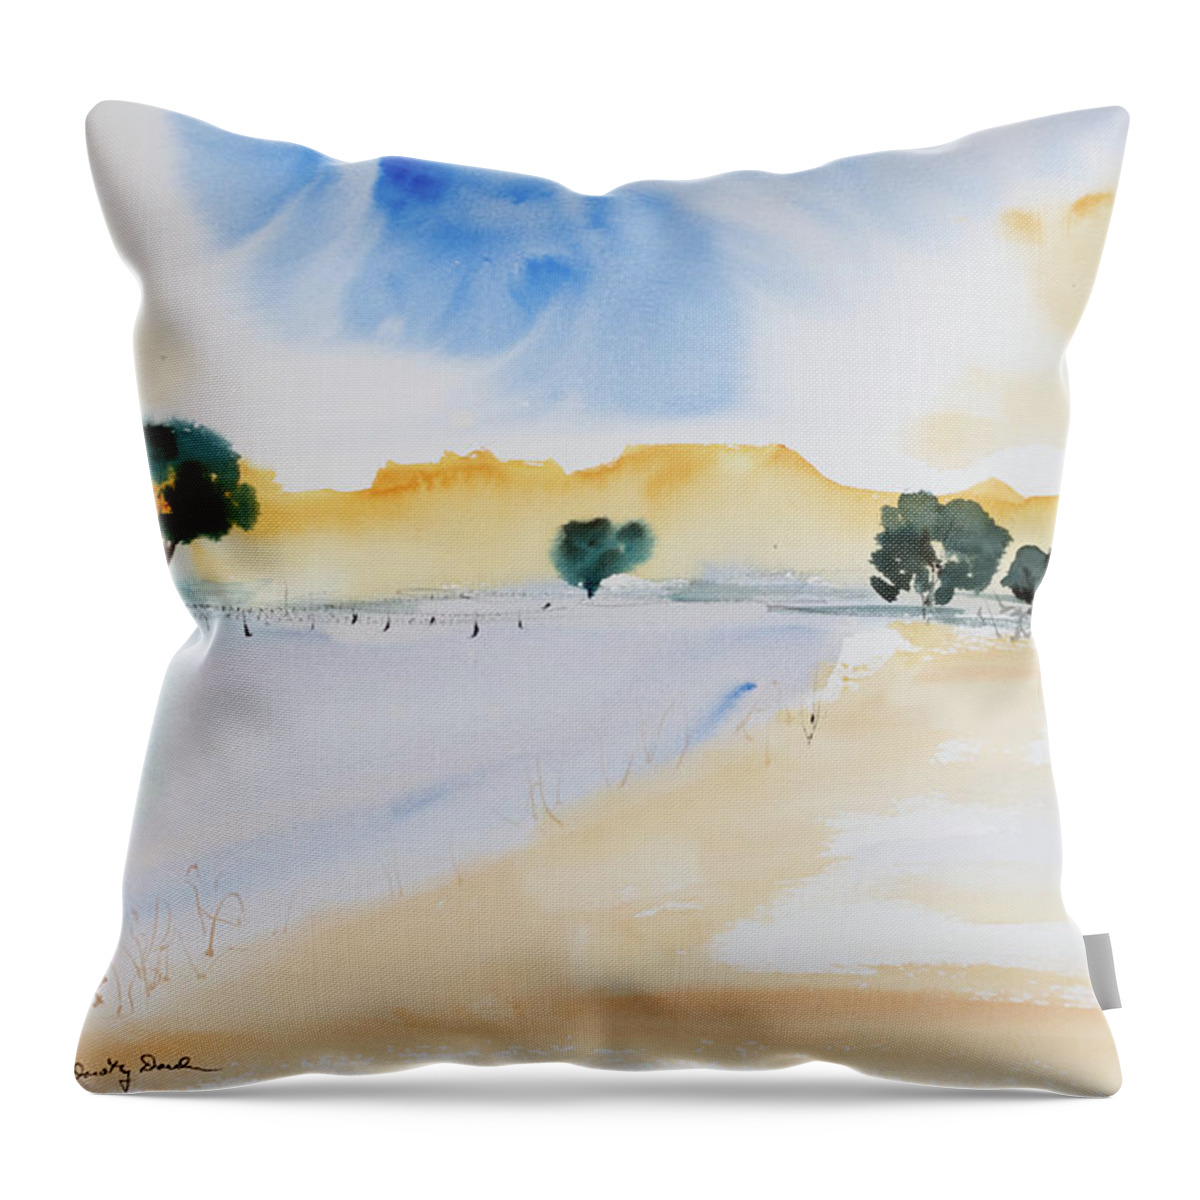 Afternoon Throw Pillow featuring the painting Summertime by Dorothy Darden